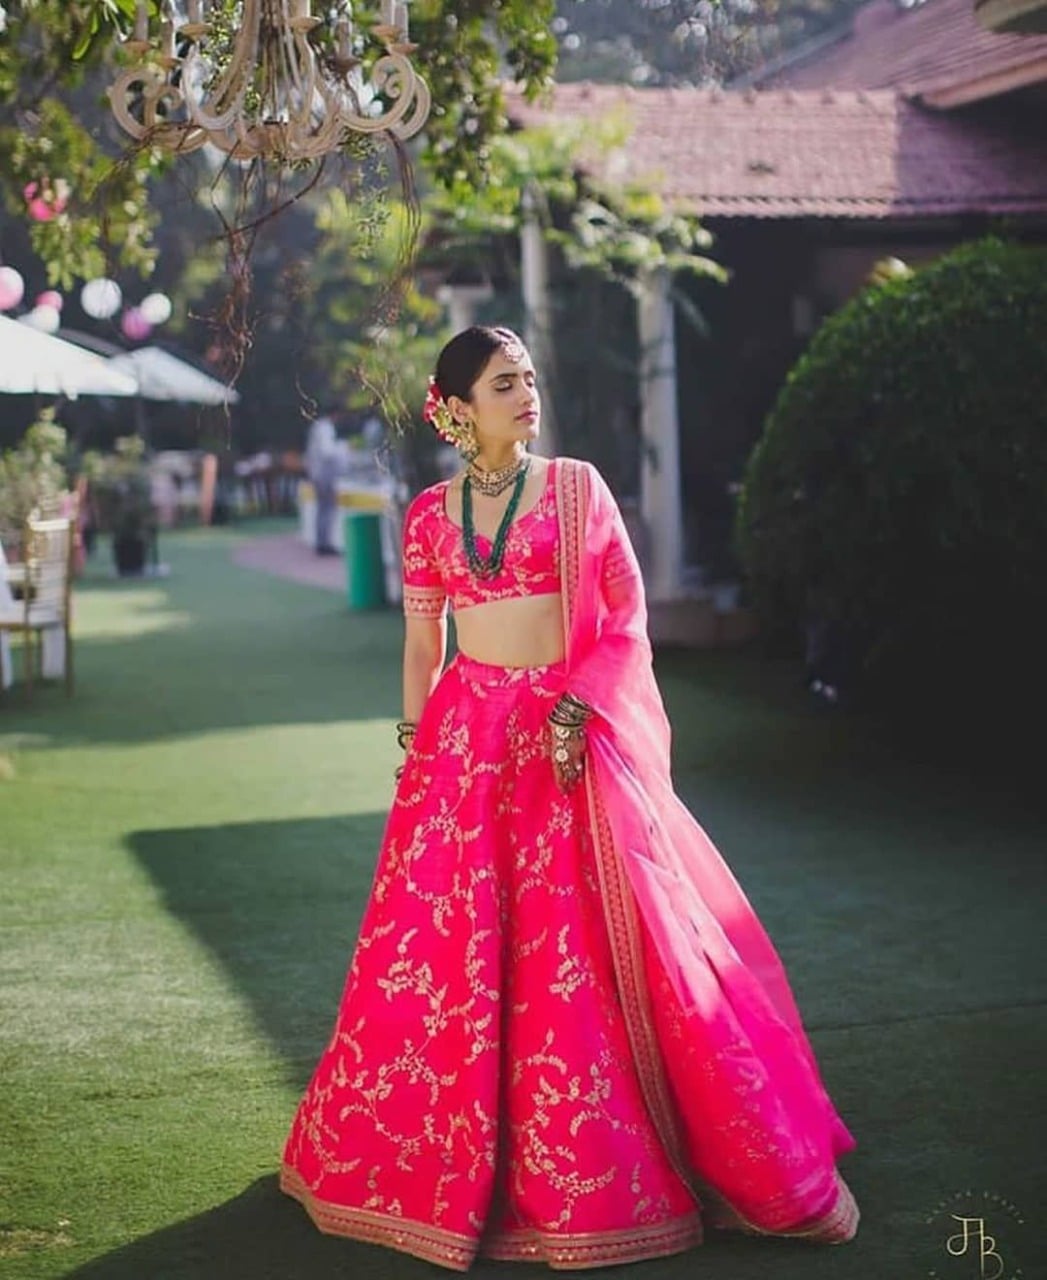 17 Sabyasachi Anarkali Dresses That Are #BridalGoals for the New-Age Bride  | Indian fashion, Sabyasachi dresses, Anarkali dress